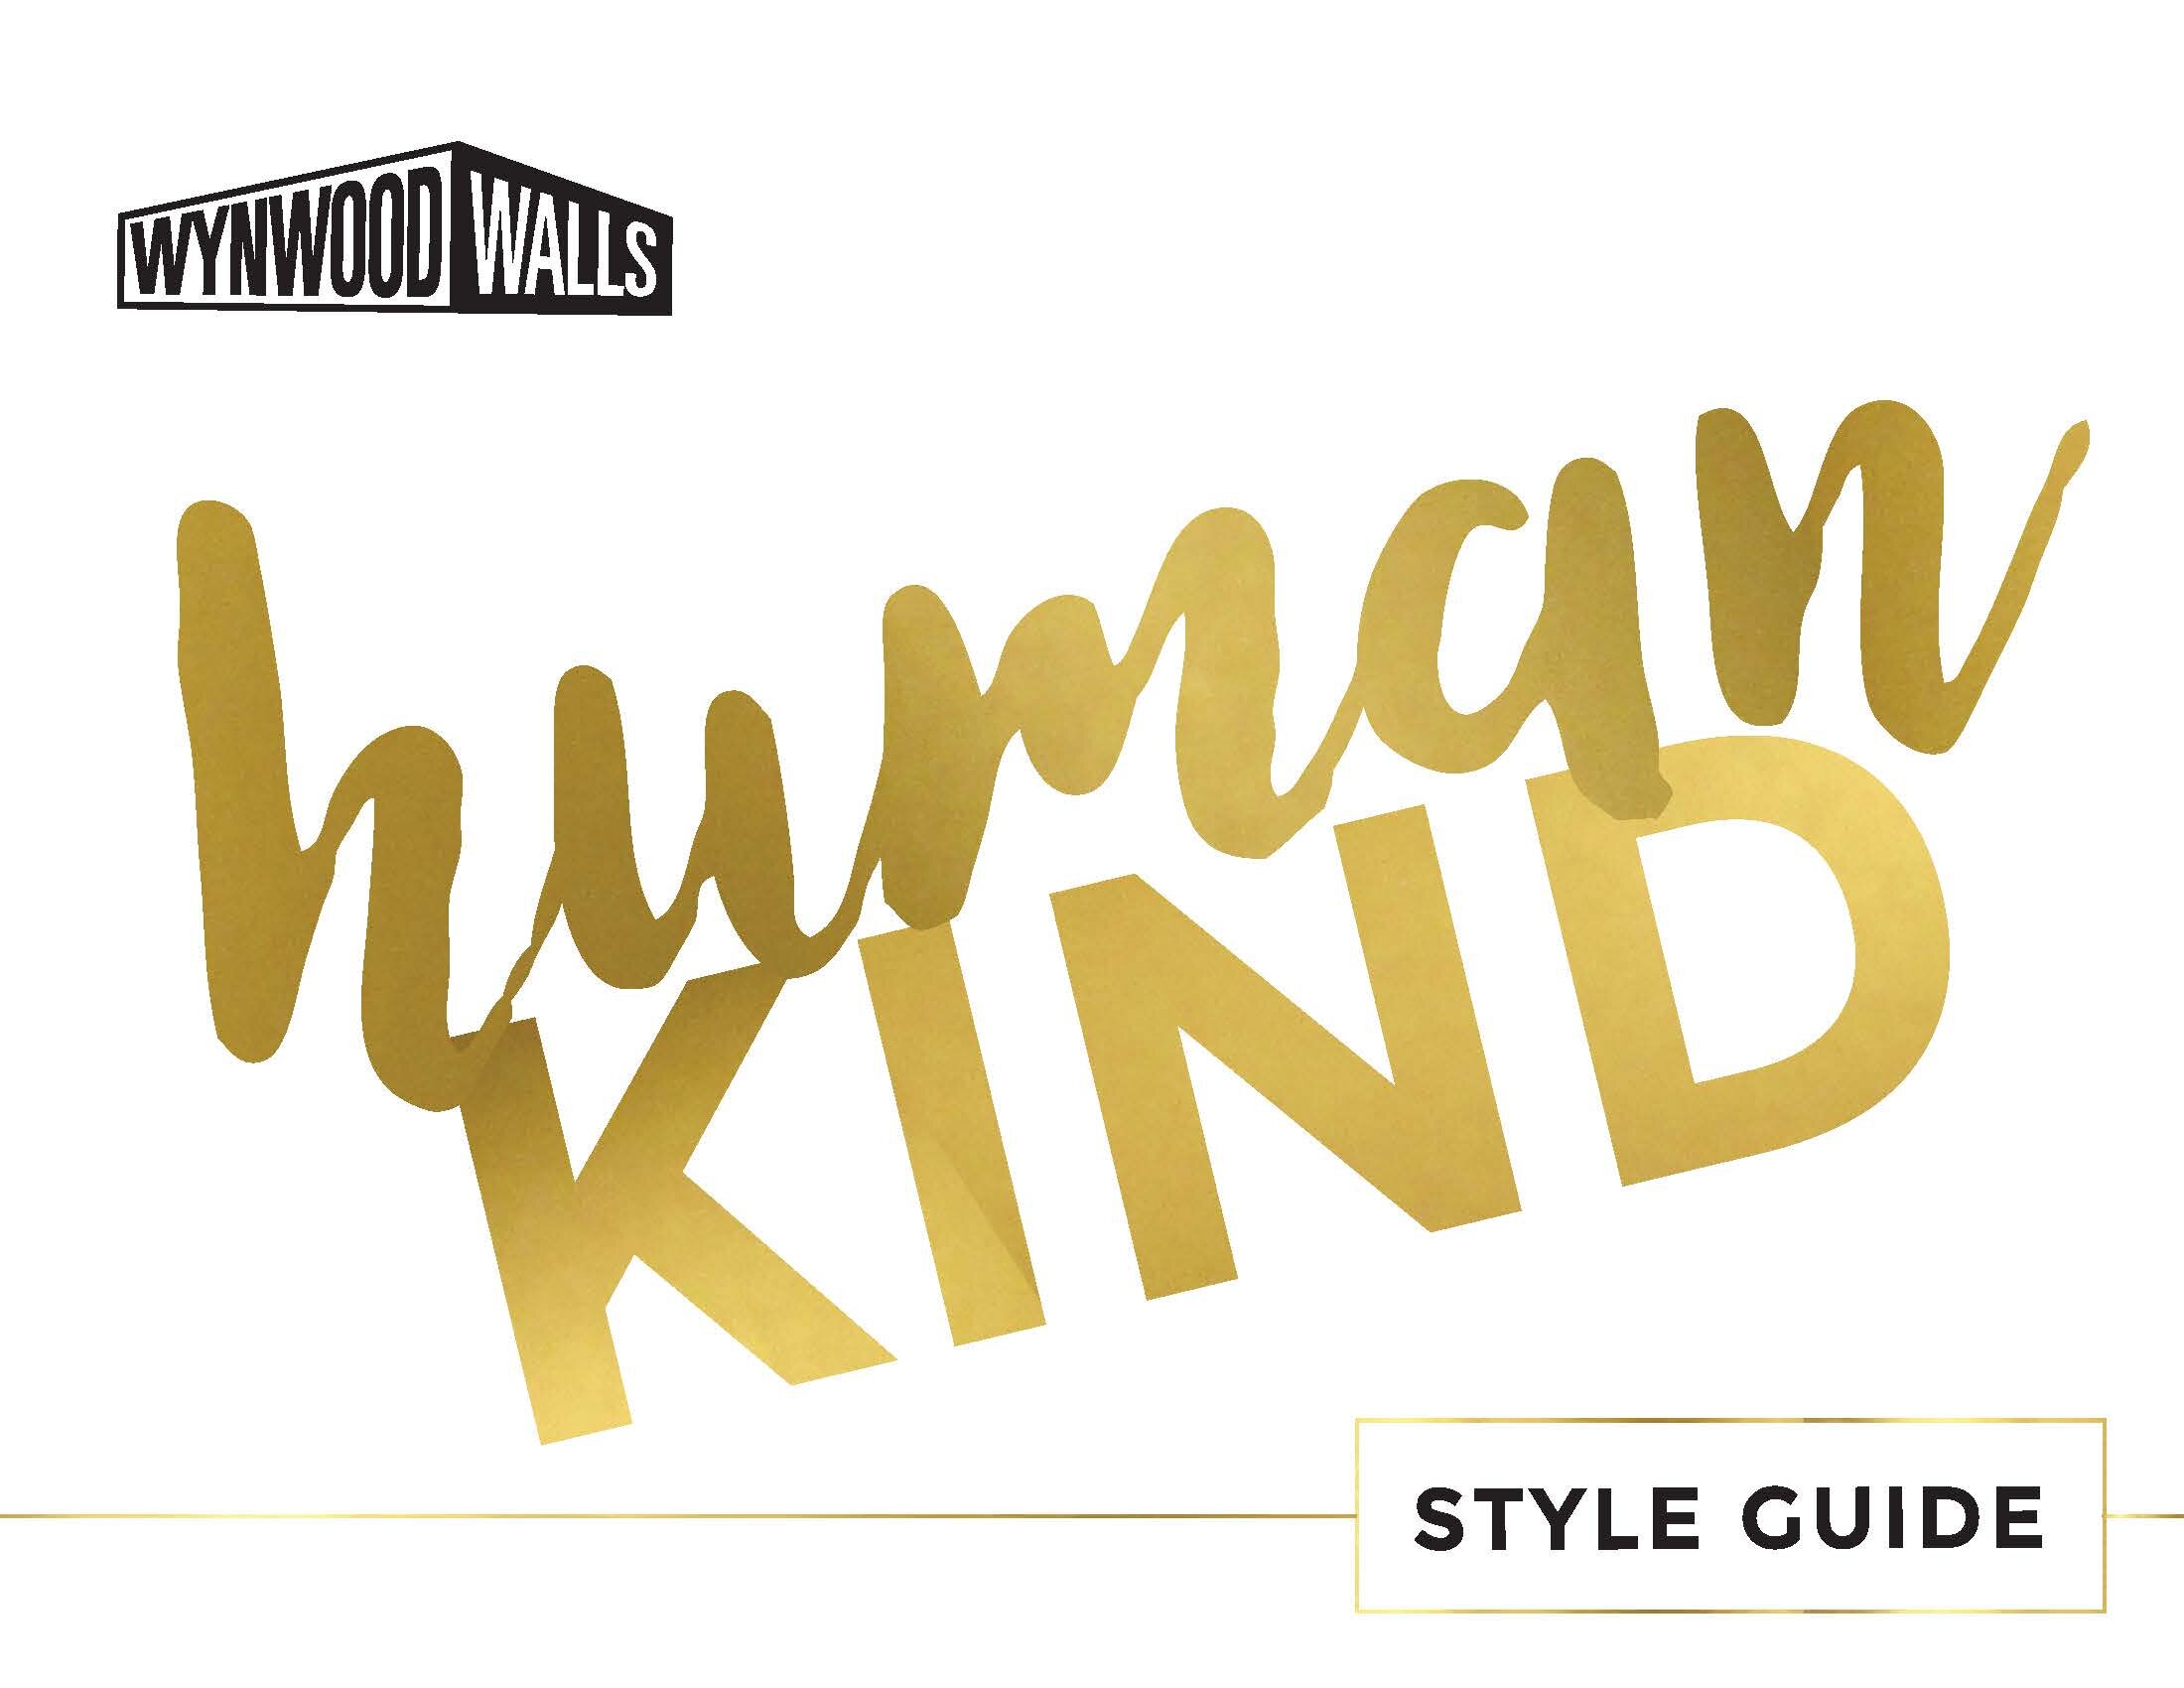 GGA_HUMANKIND STYLE GUIDE_Page_1.jpg